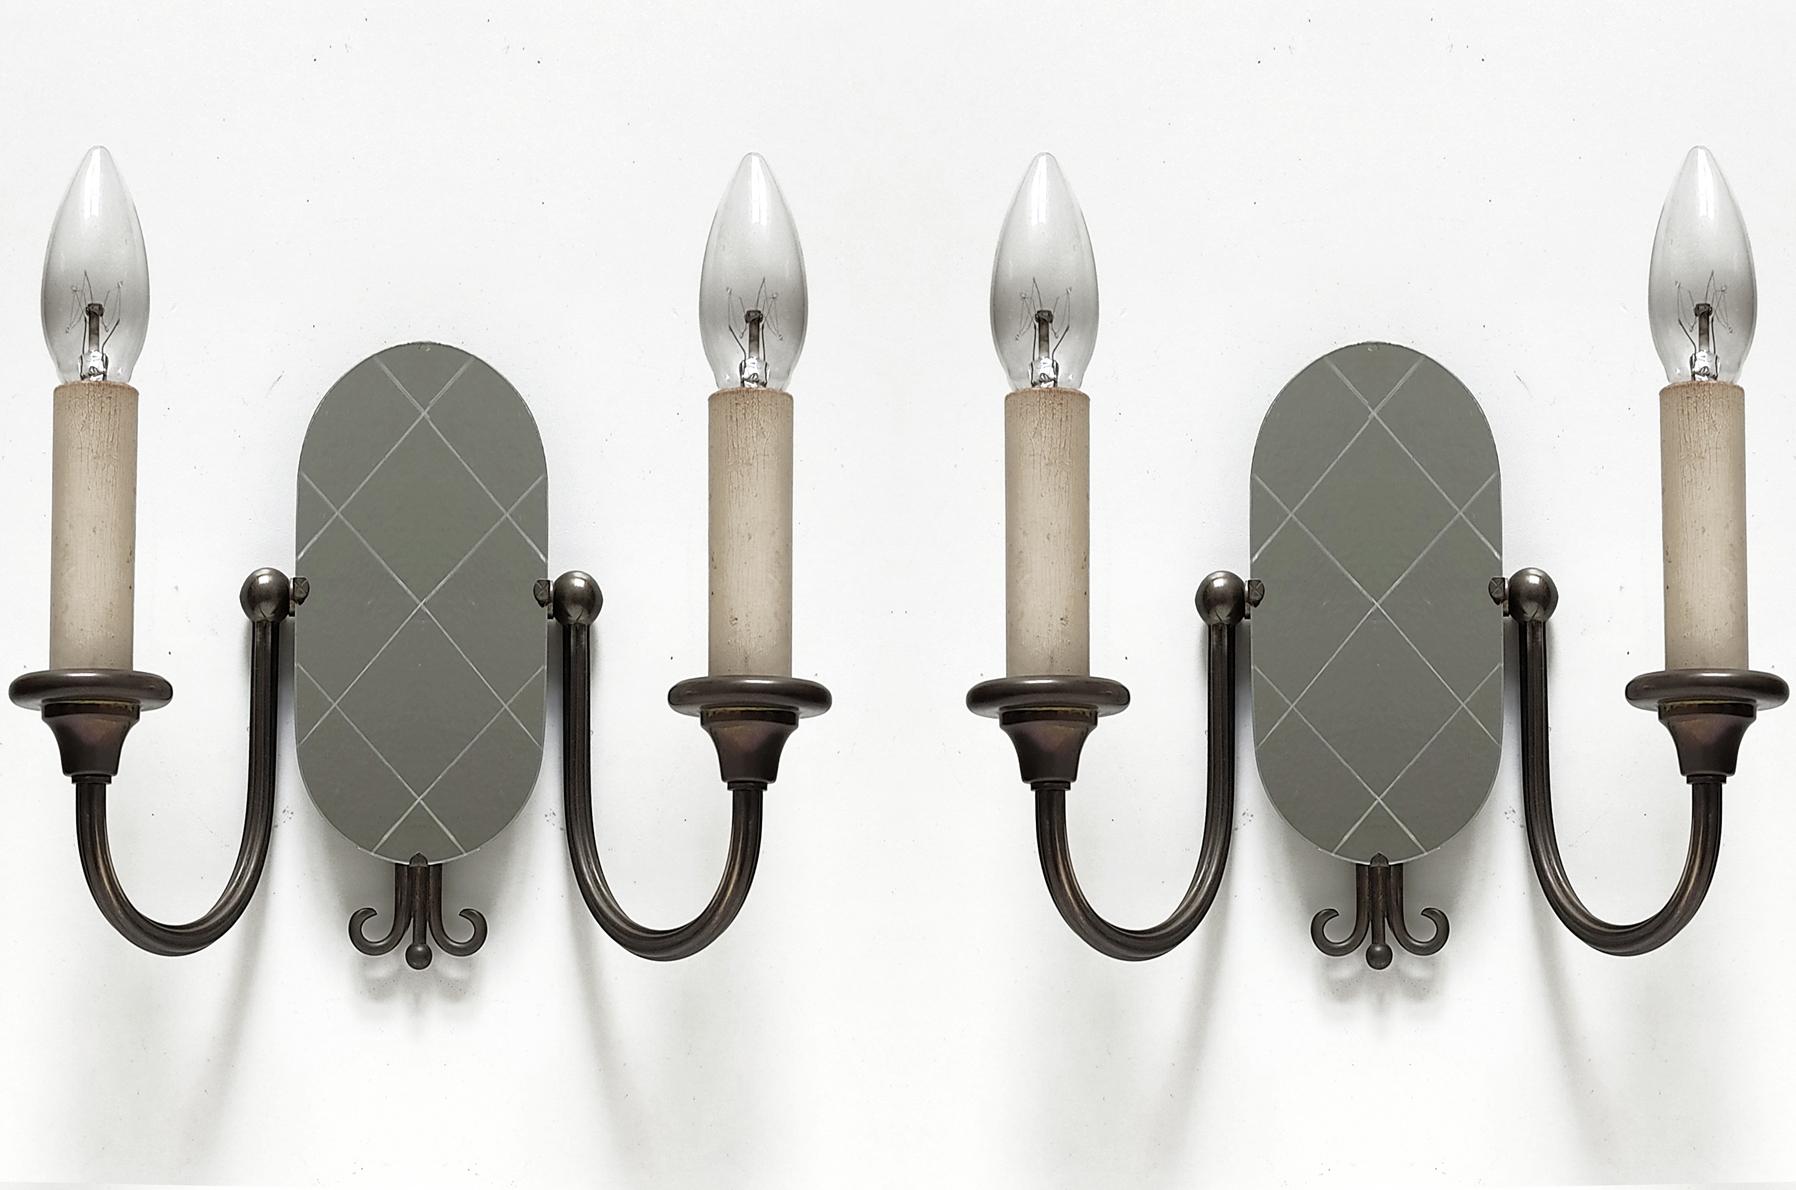 Beautiful pair of brass and mirror wall lights sconces.
Italy, 1920s-1940s
Lamp sockets: 2.